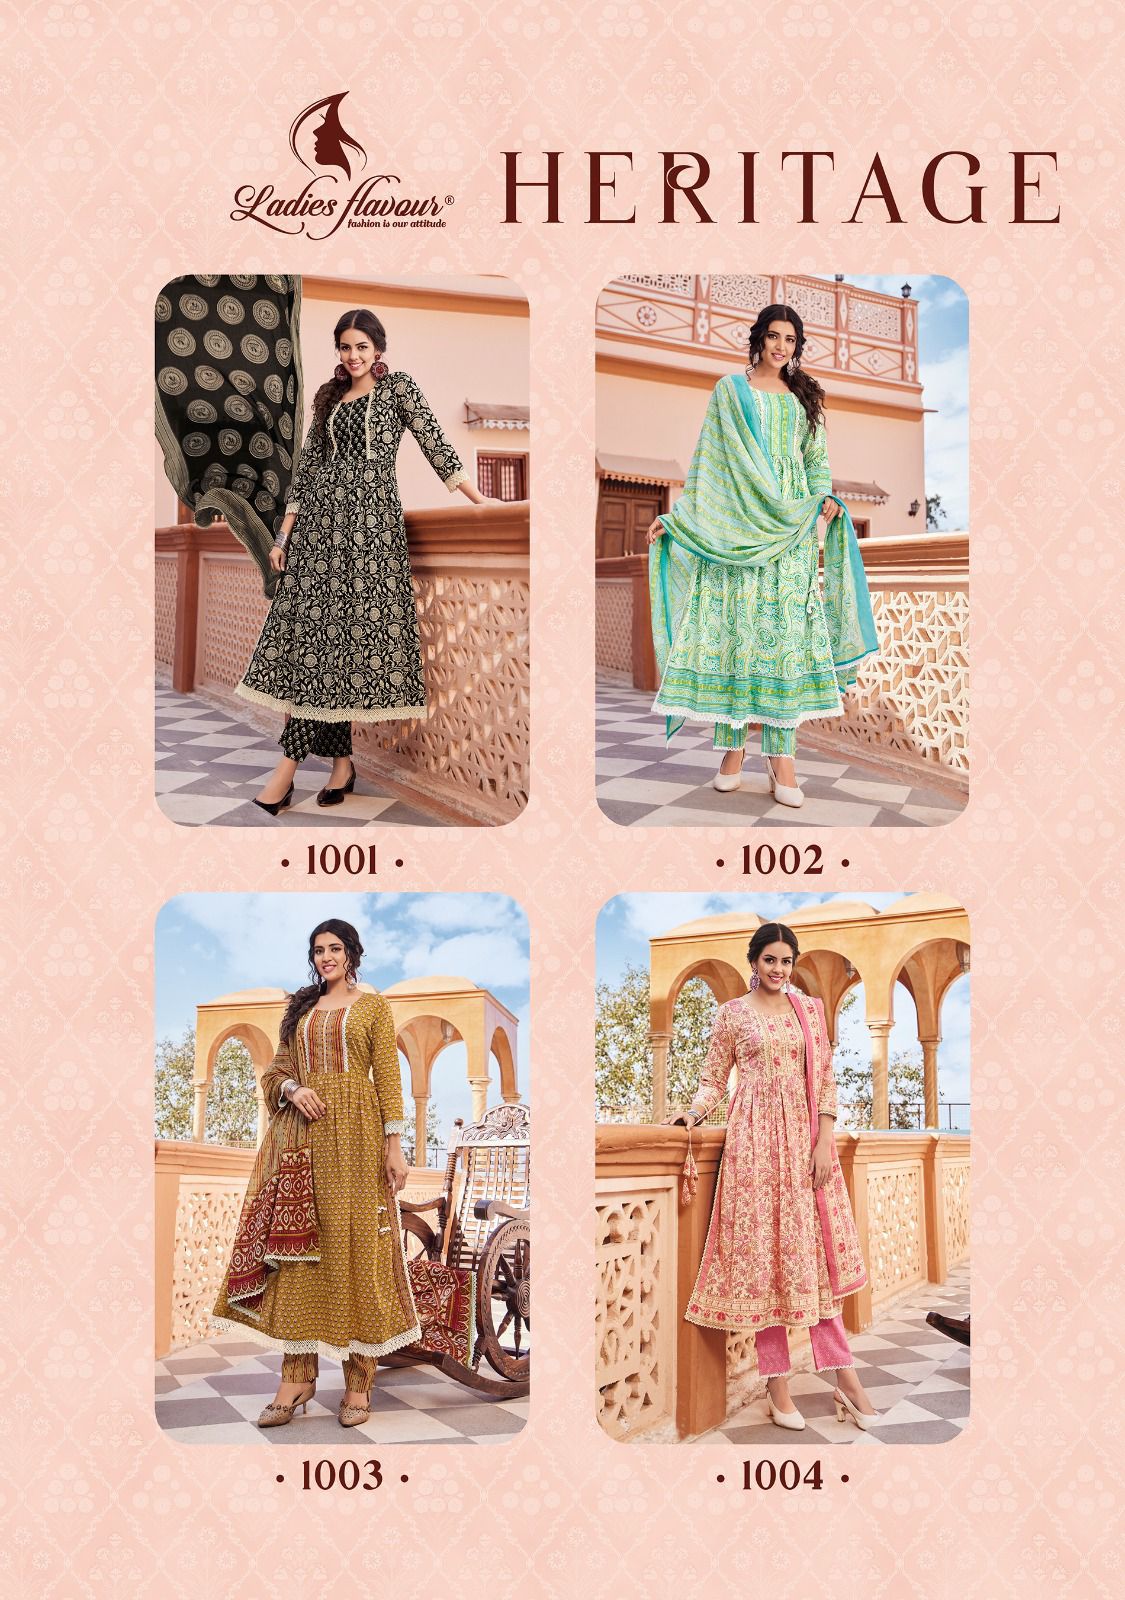 Ladies Flavour Heritage collection 2